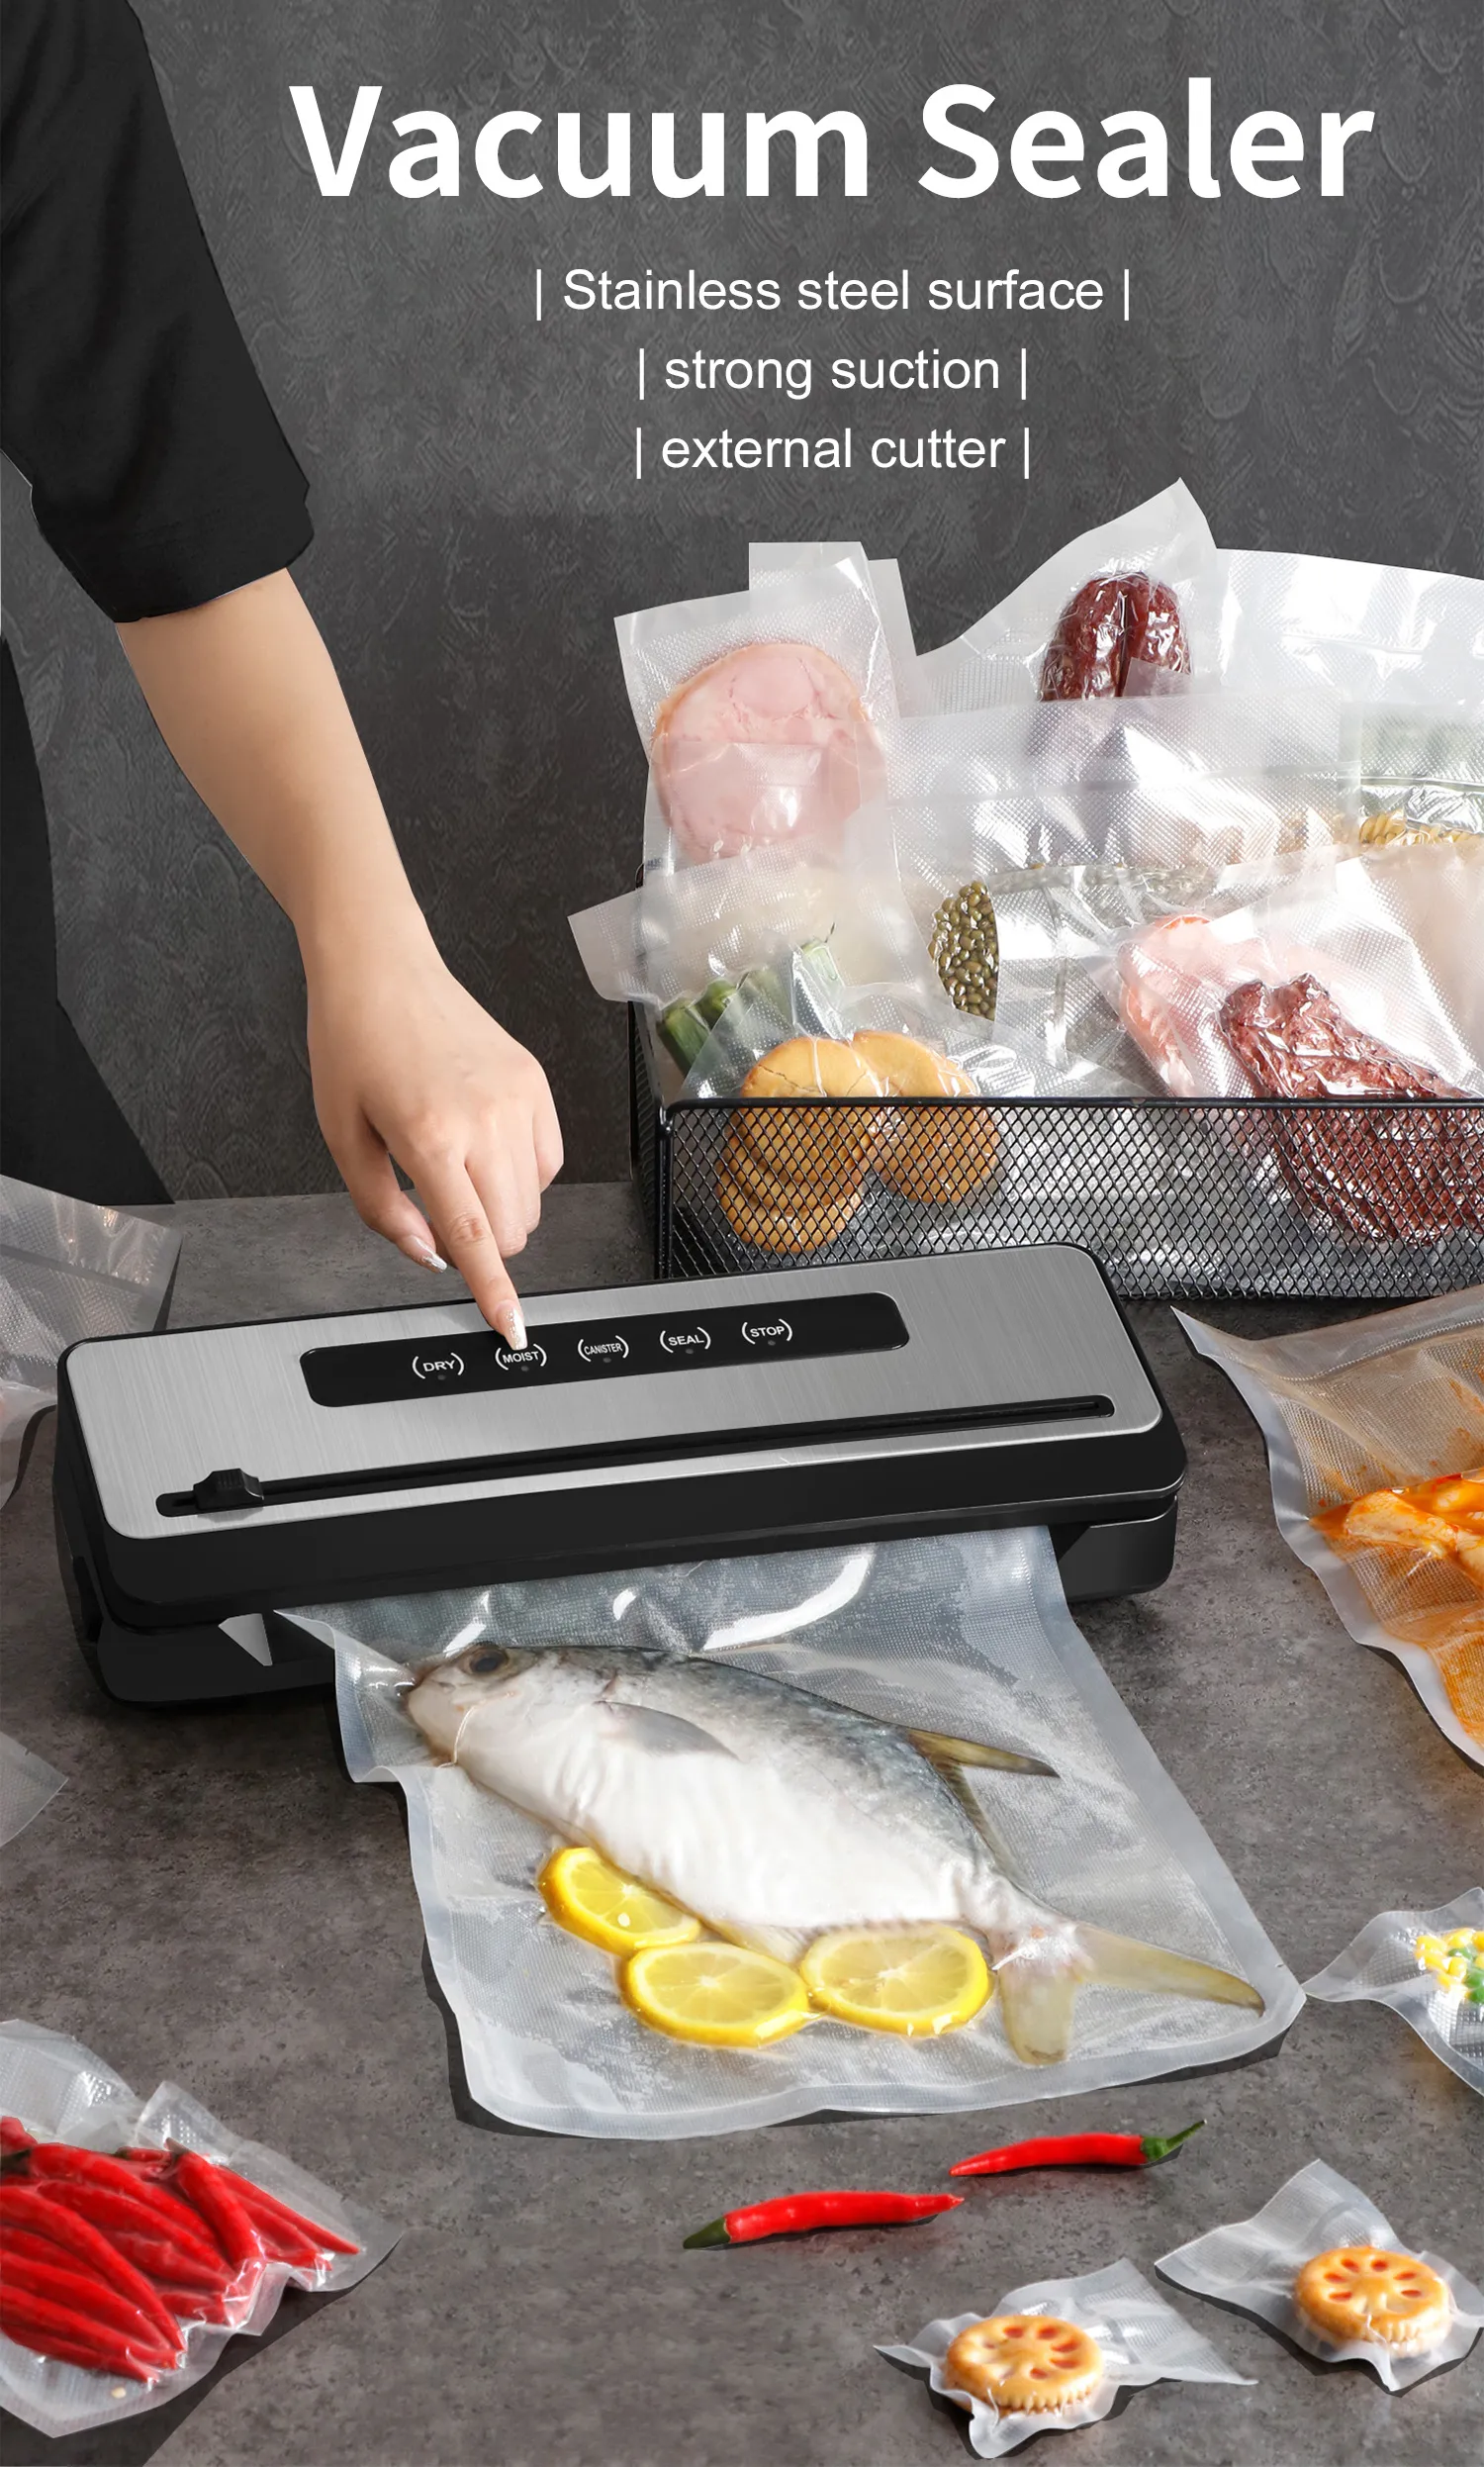 How Does The Vacuum Sealer Benefit Us?